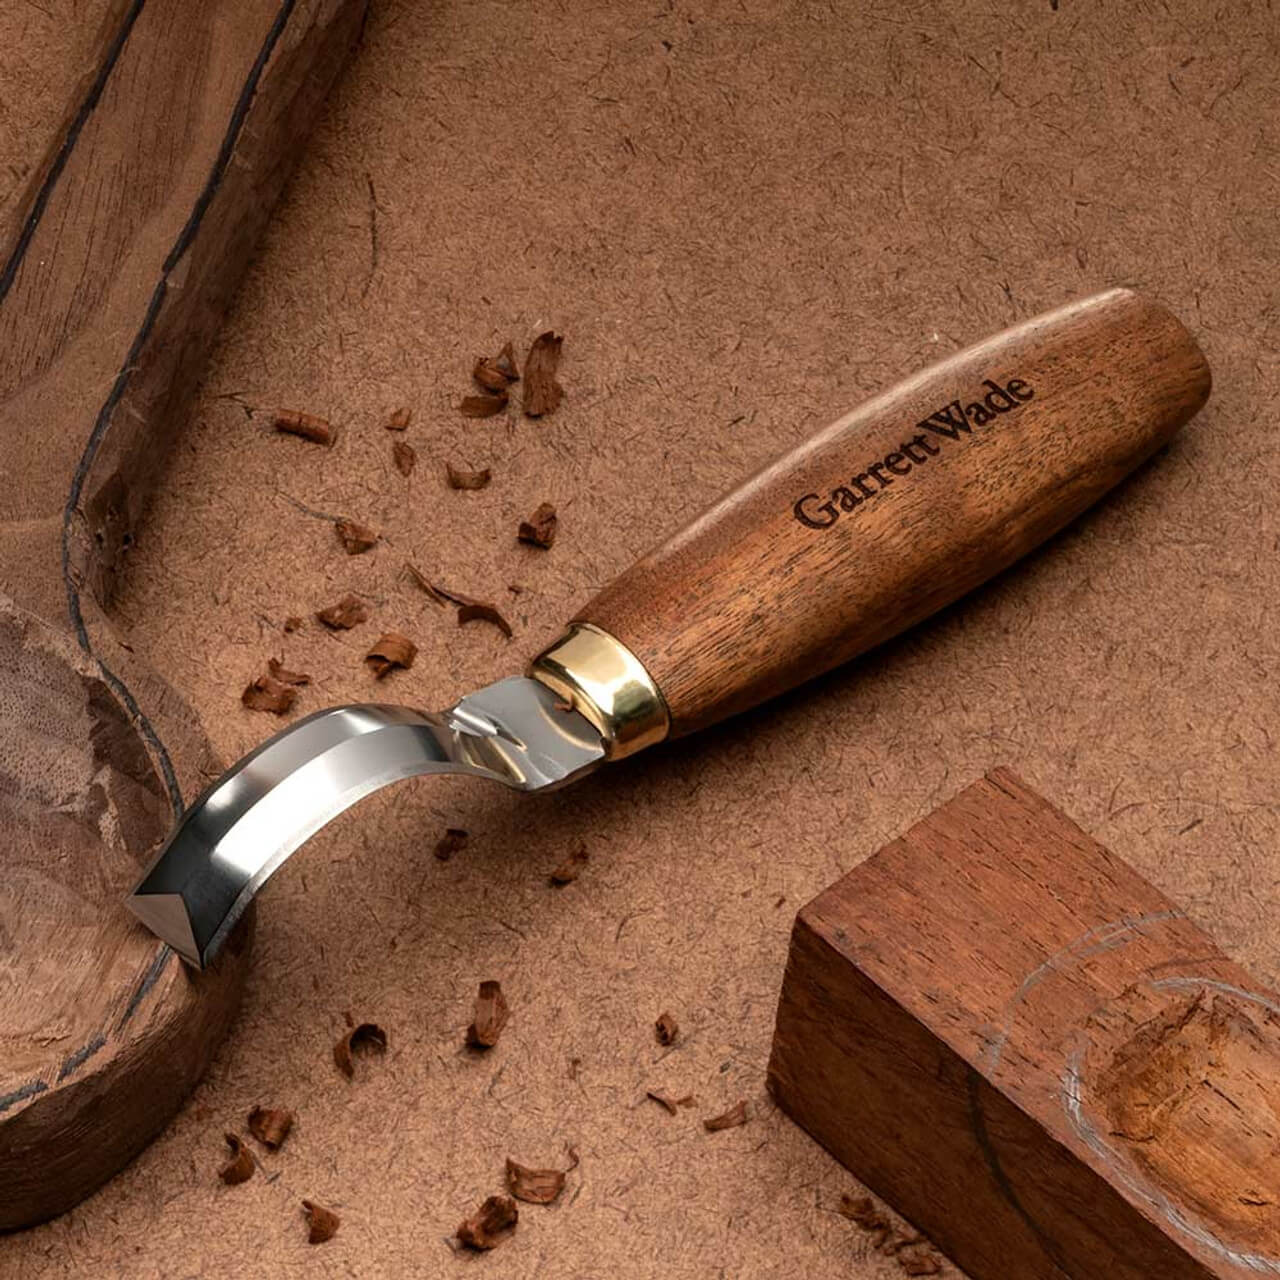 Spoon Carving Hook Knife №4 - The Spoon Crank